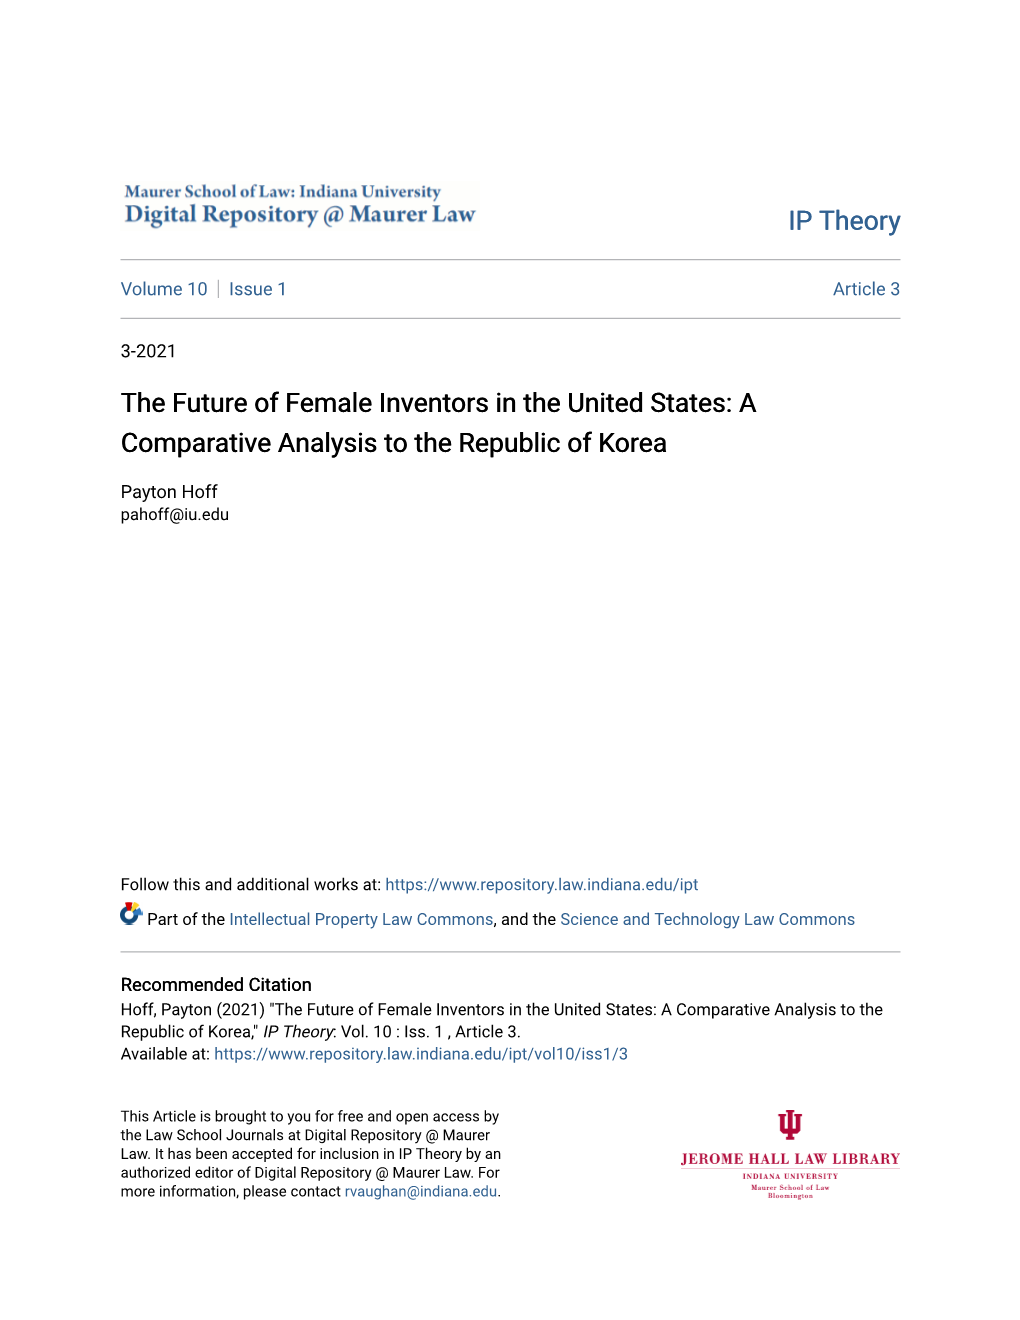 The Future of Female Inventors in the United States: a Comparative Analysis to the Republic of Korea